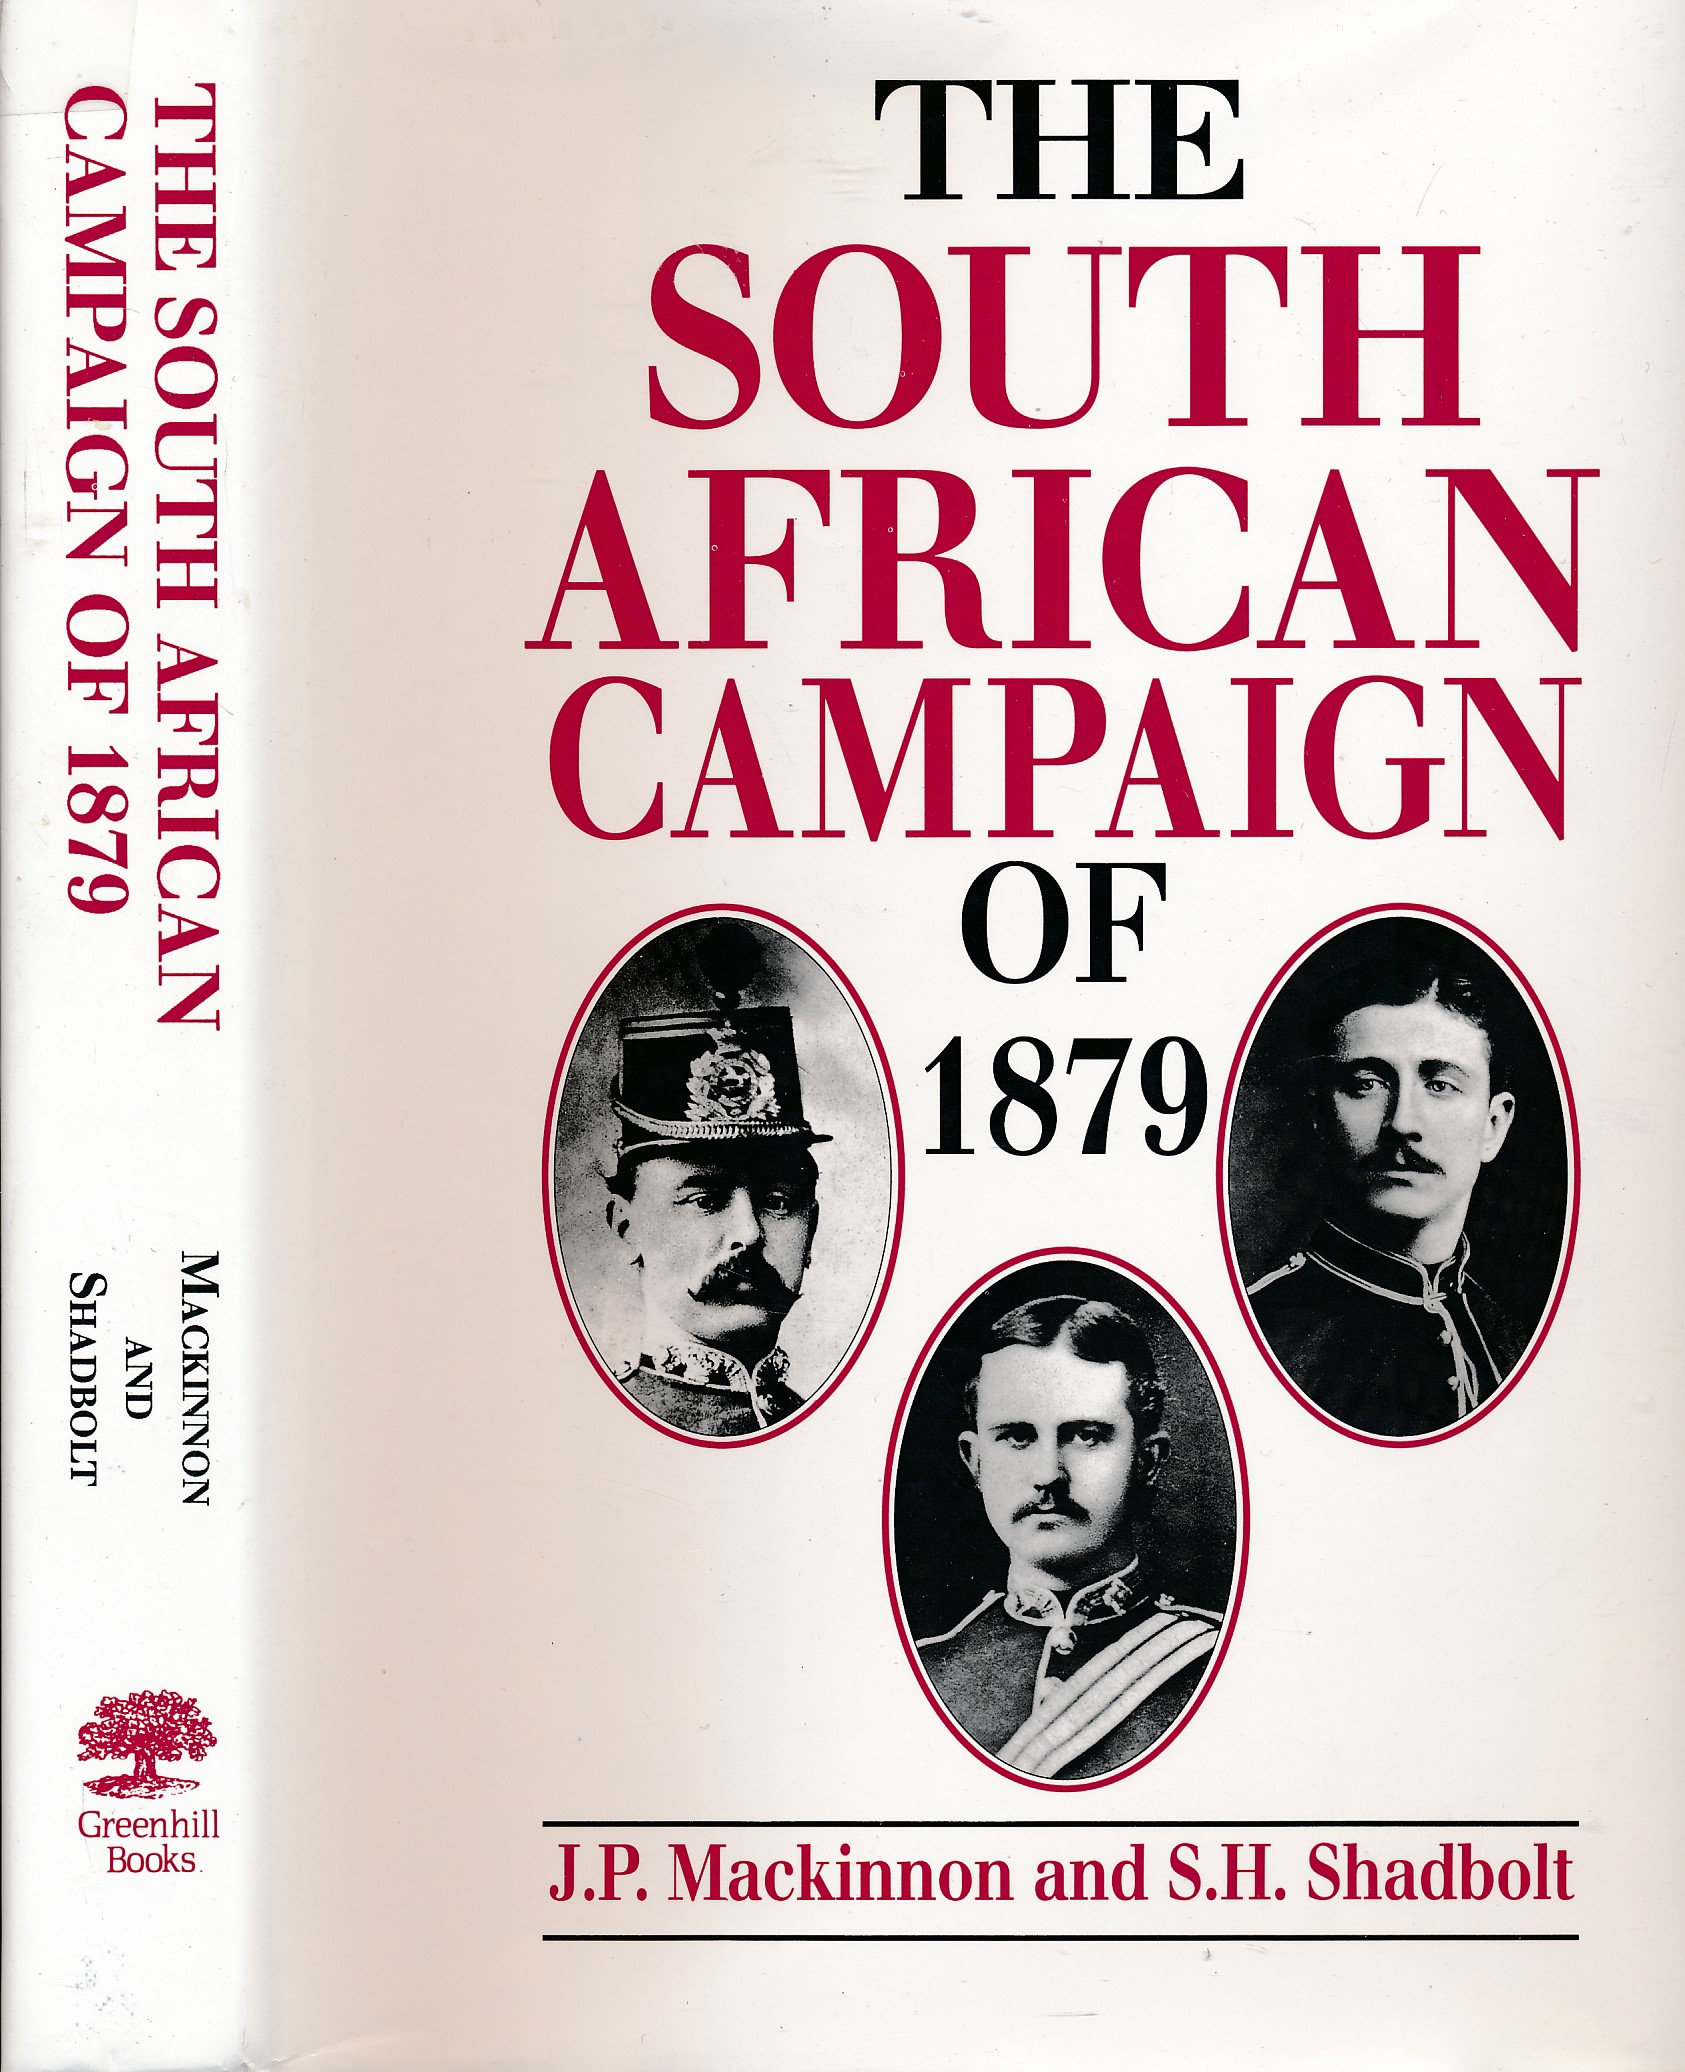 The South African Campaign of 1879